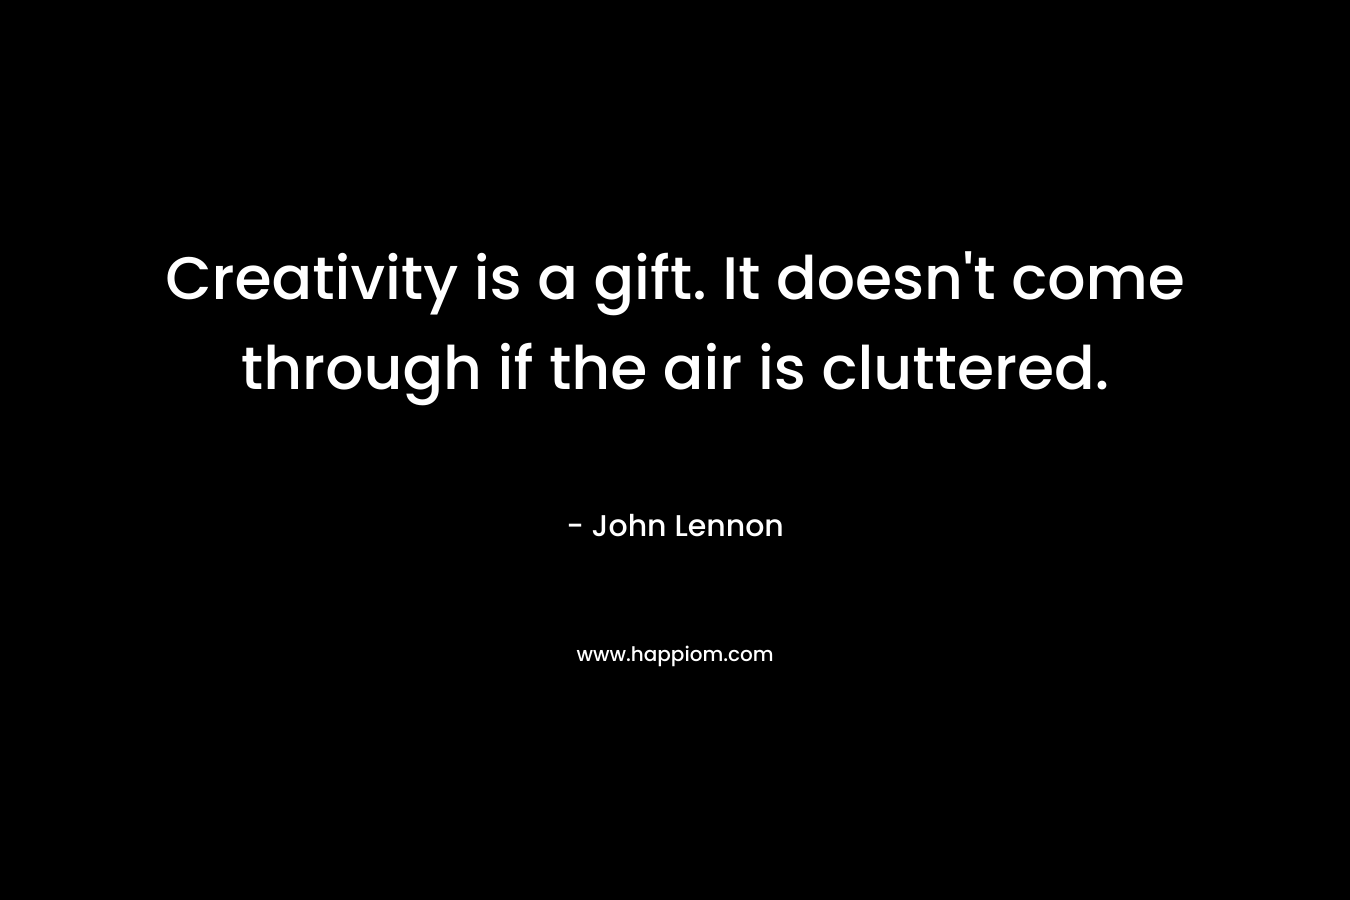 Creativity is a gift. It doesn't come through if the air is cluttered.